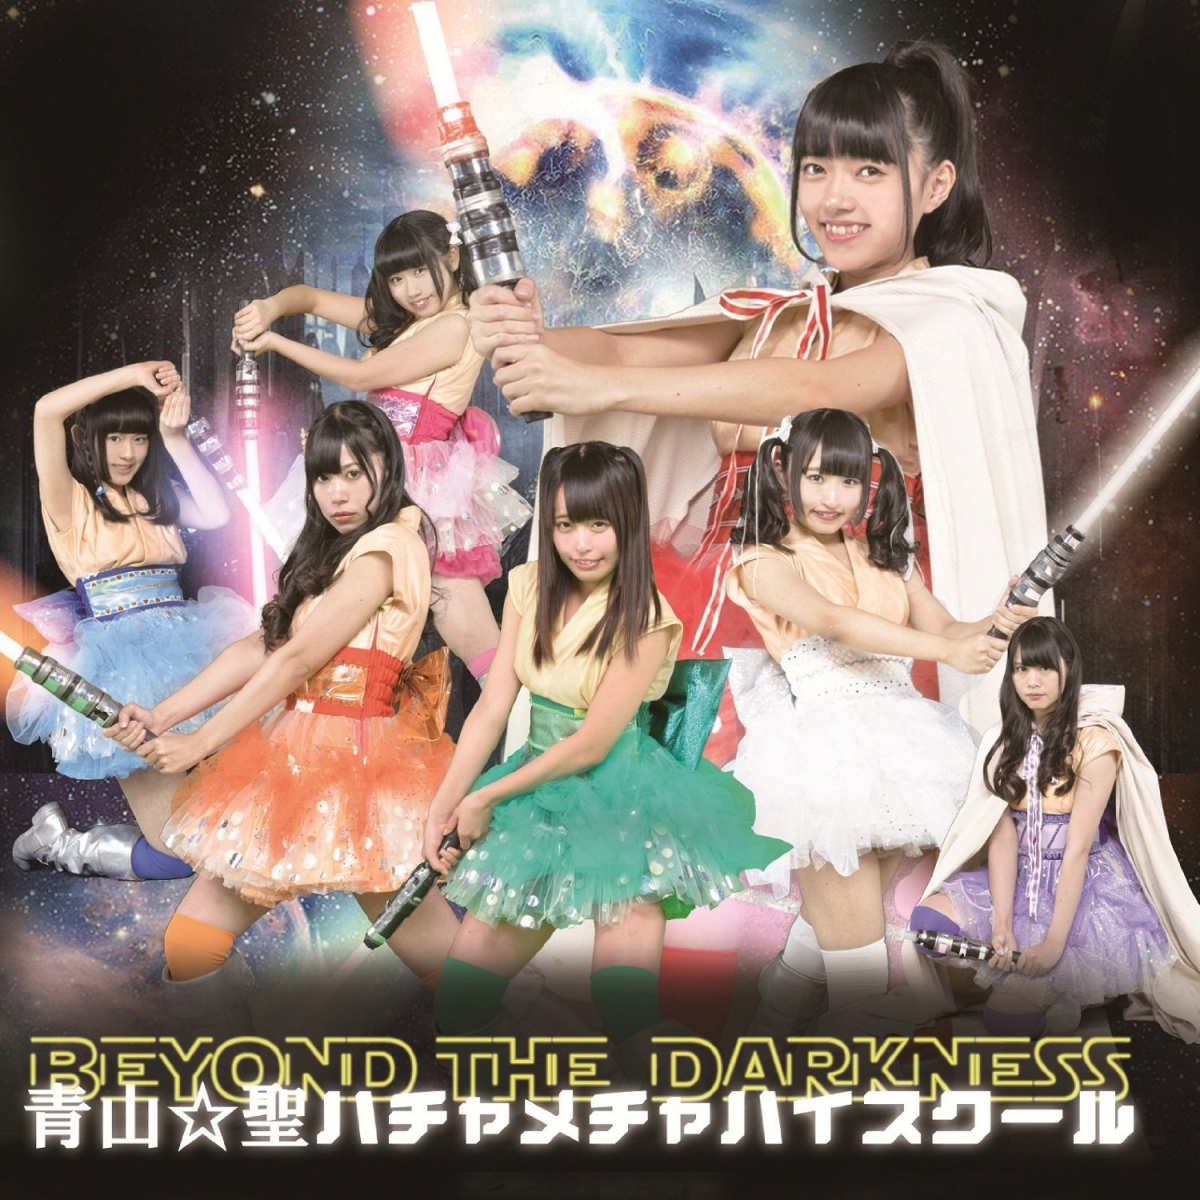 Aoyama☆Saint Hachamecha High School Power Up for 2015 in the MV for “BEYOND THE DARKNESS”!